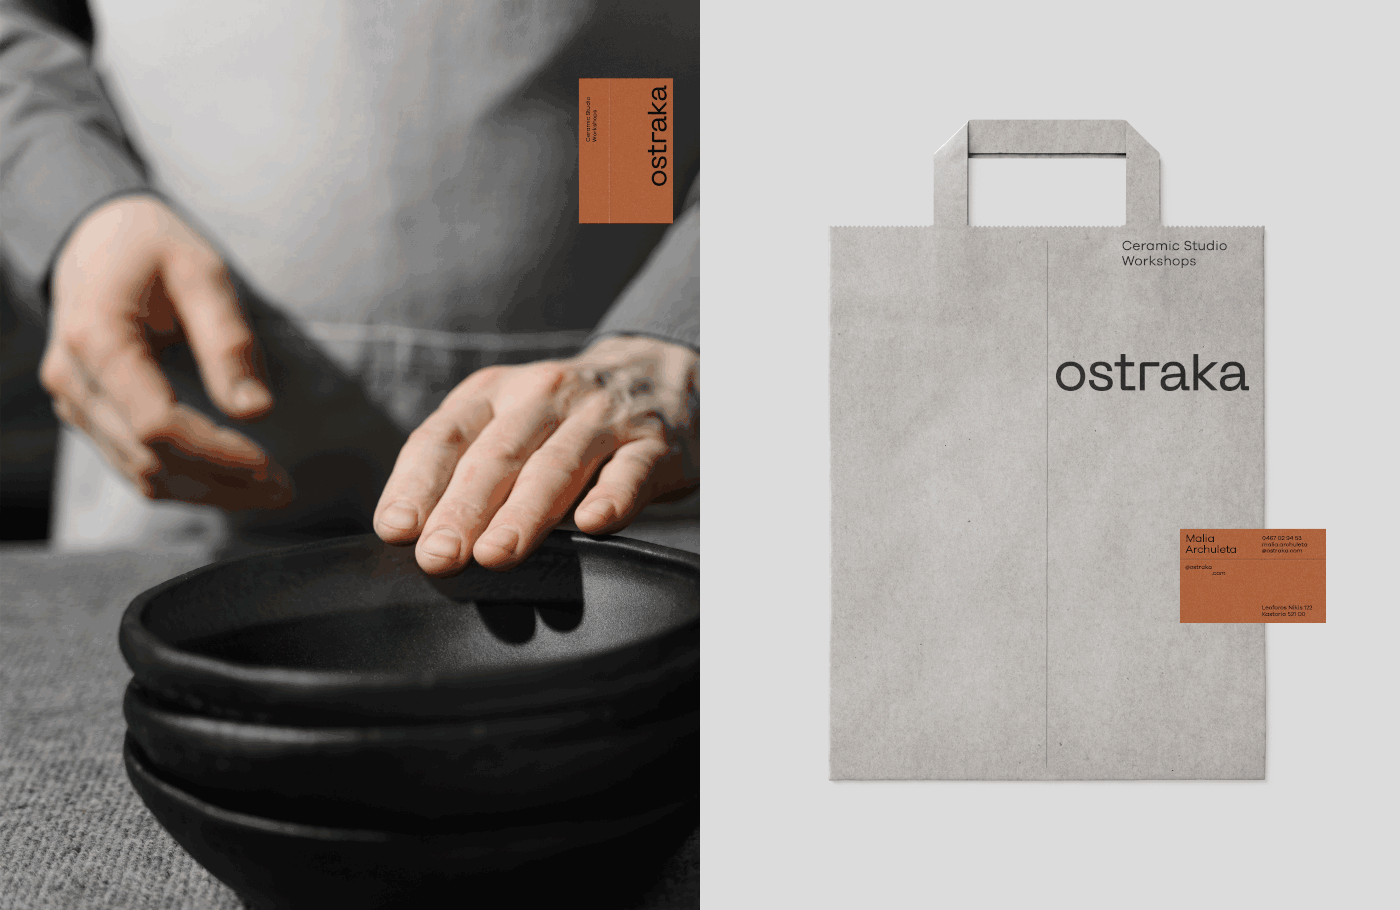 Artifact from the Branding and Visual Identity in Ostraka’s Pottery Art article on Abduzeedo